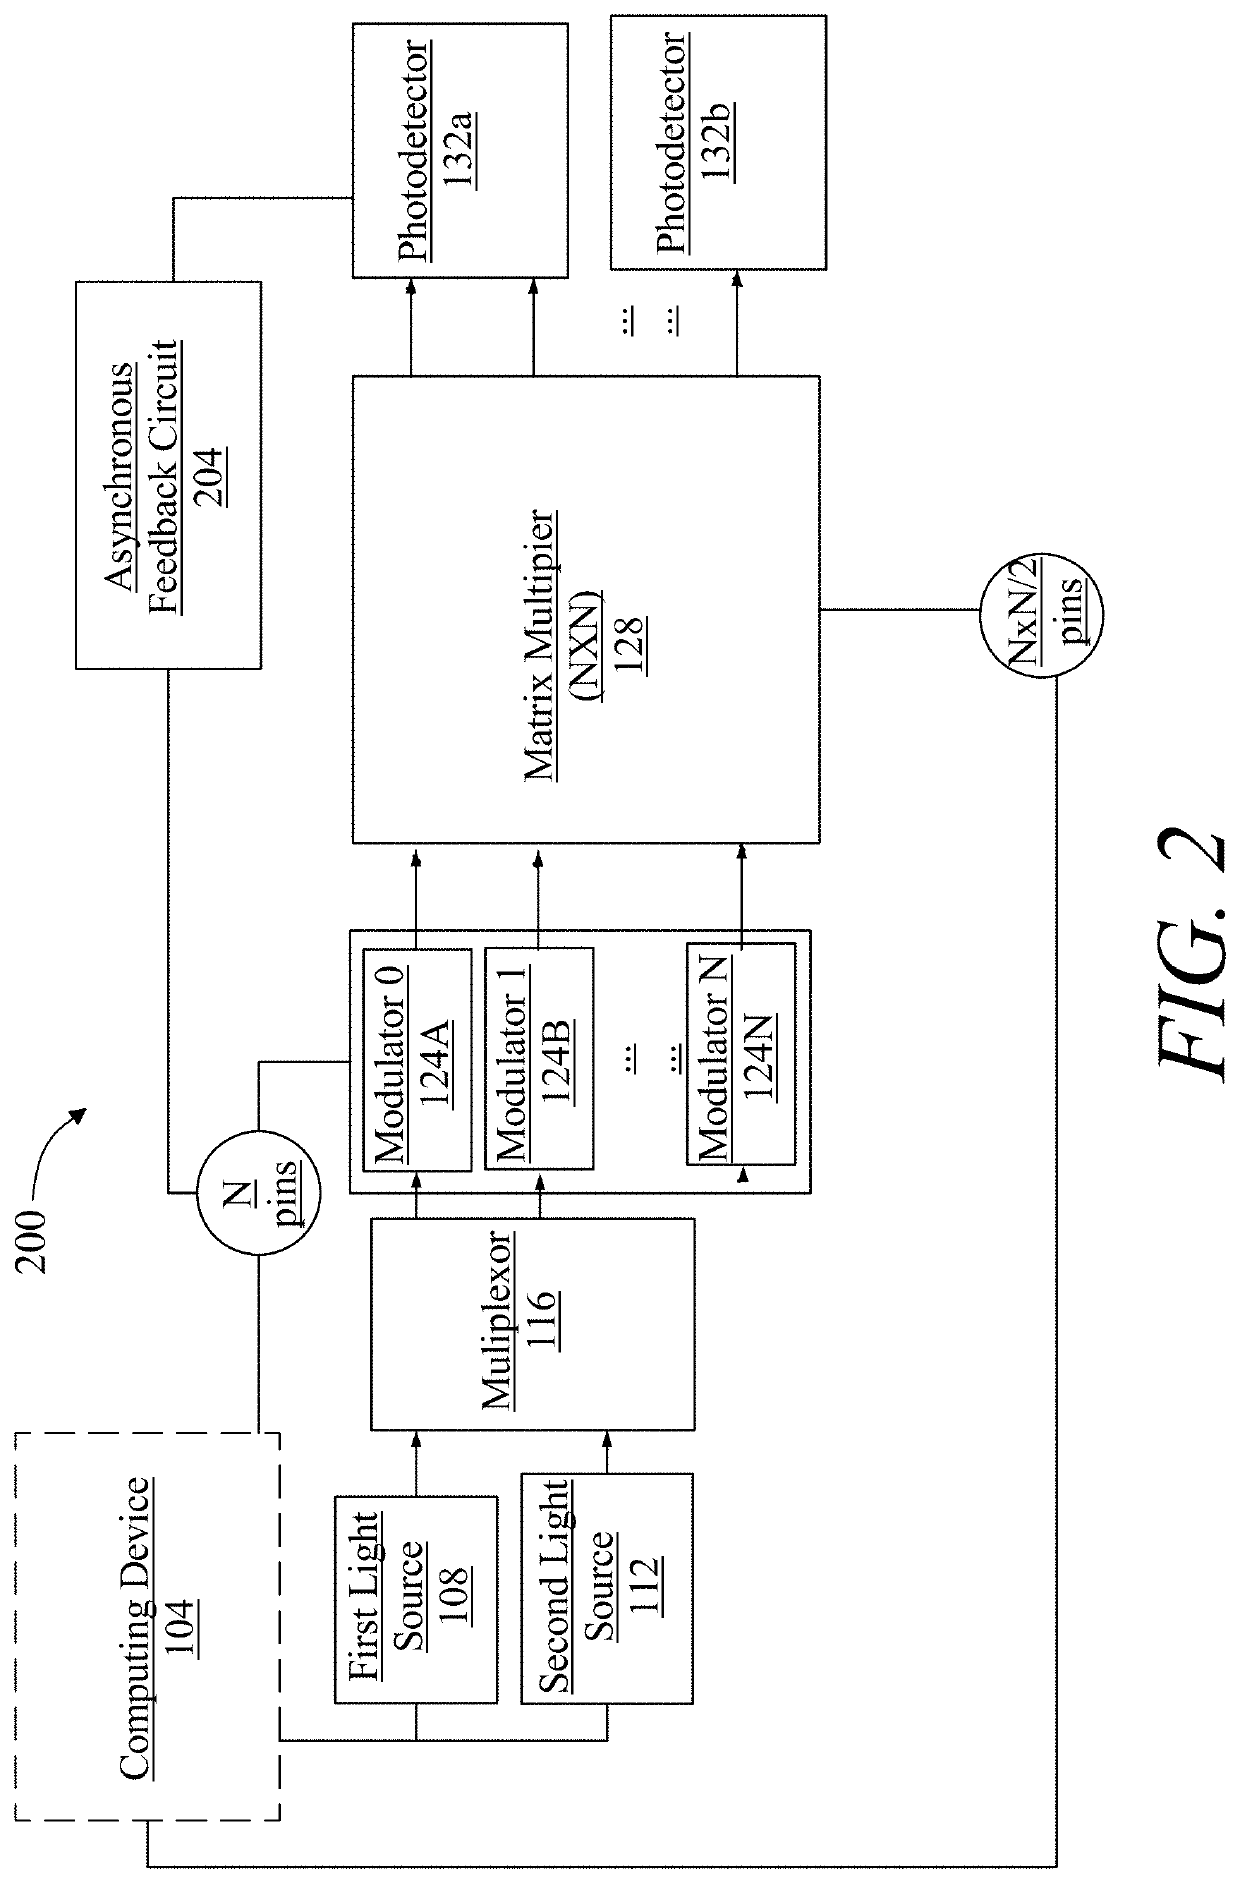 Methods and systems for optical matrix calculation